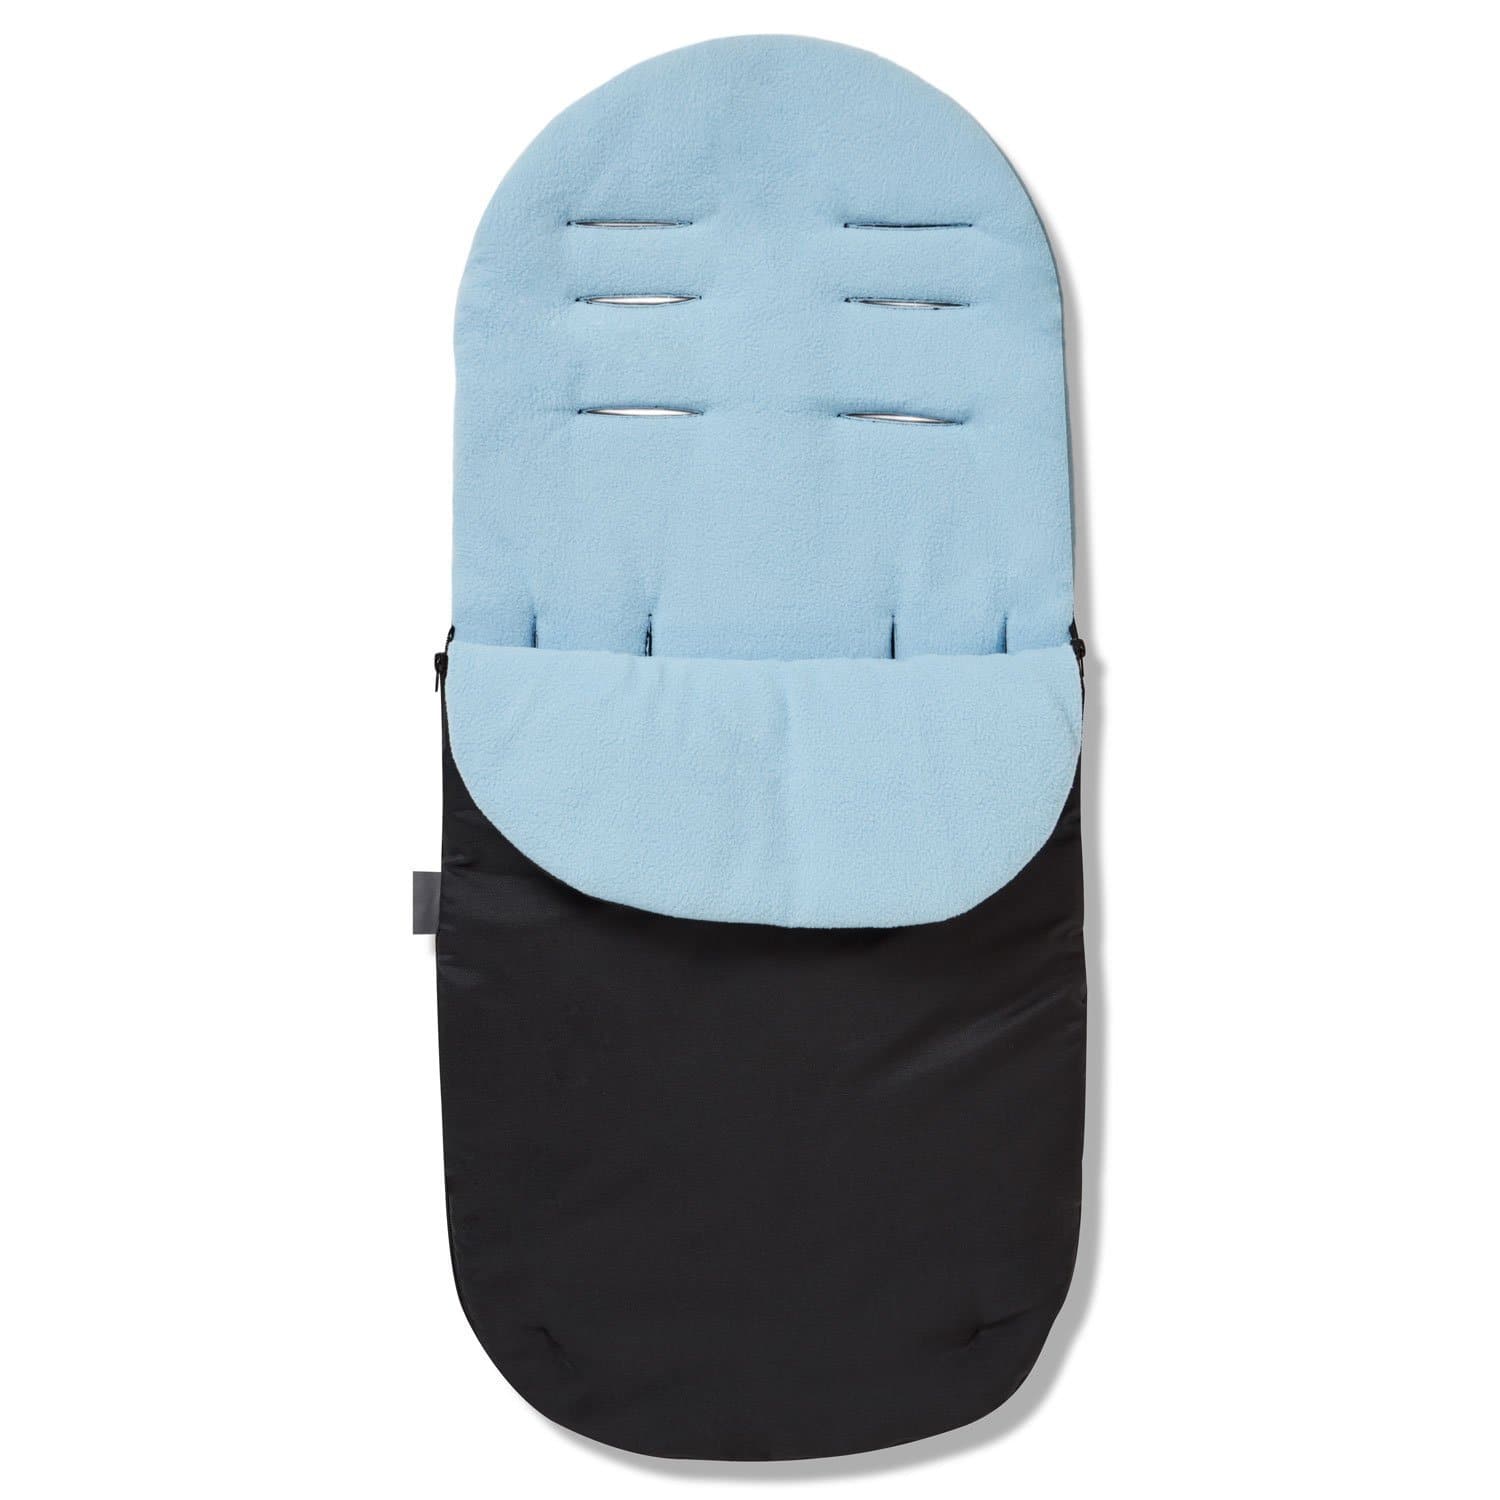 Footmuff / Cosy Toes Compatible with Valco - For Your Little One